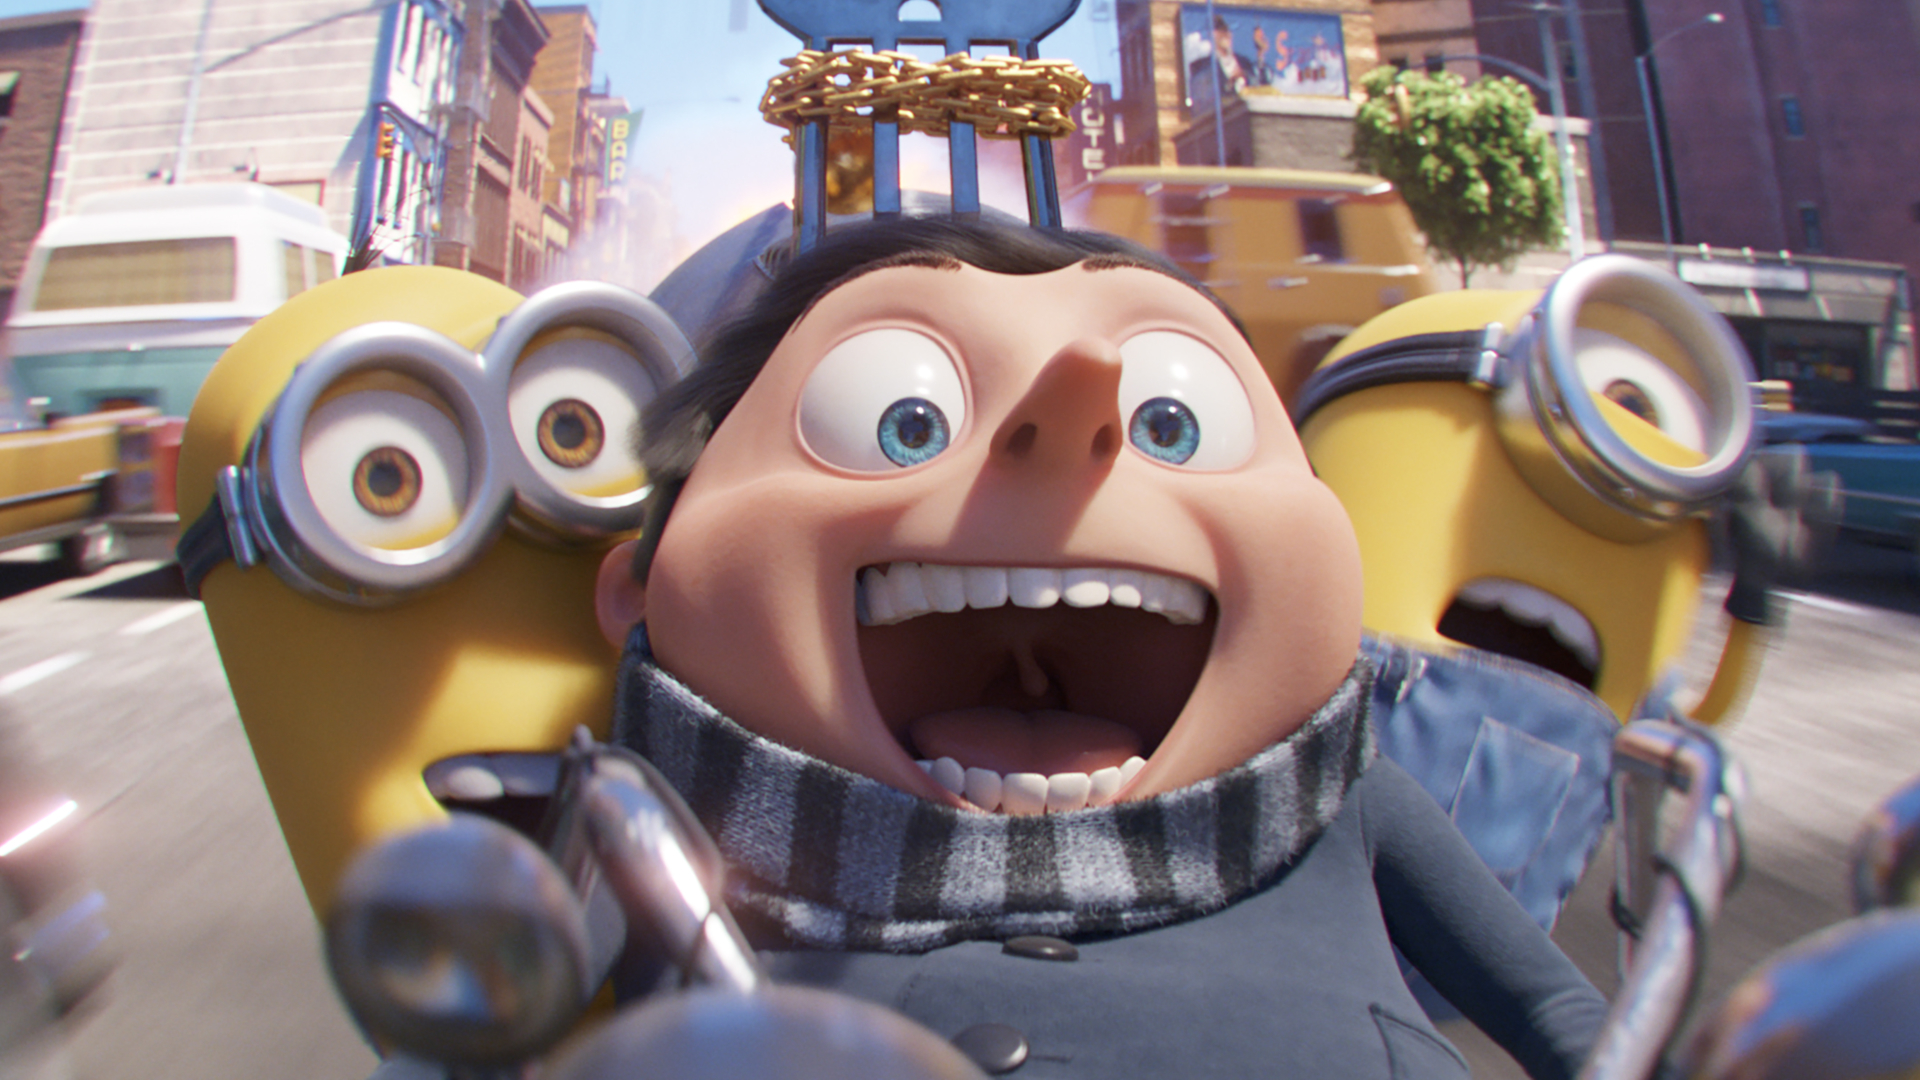 android gru (despicable me), movie, minions: the rise of gru